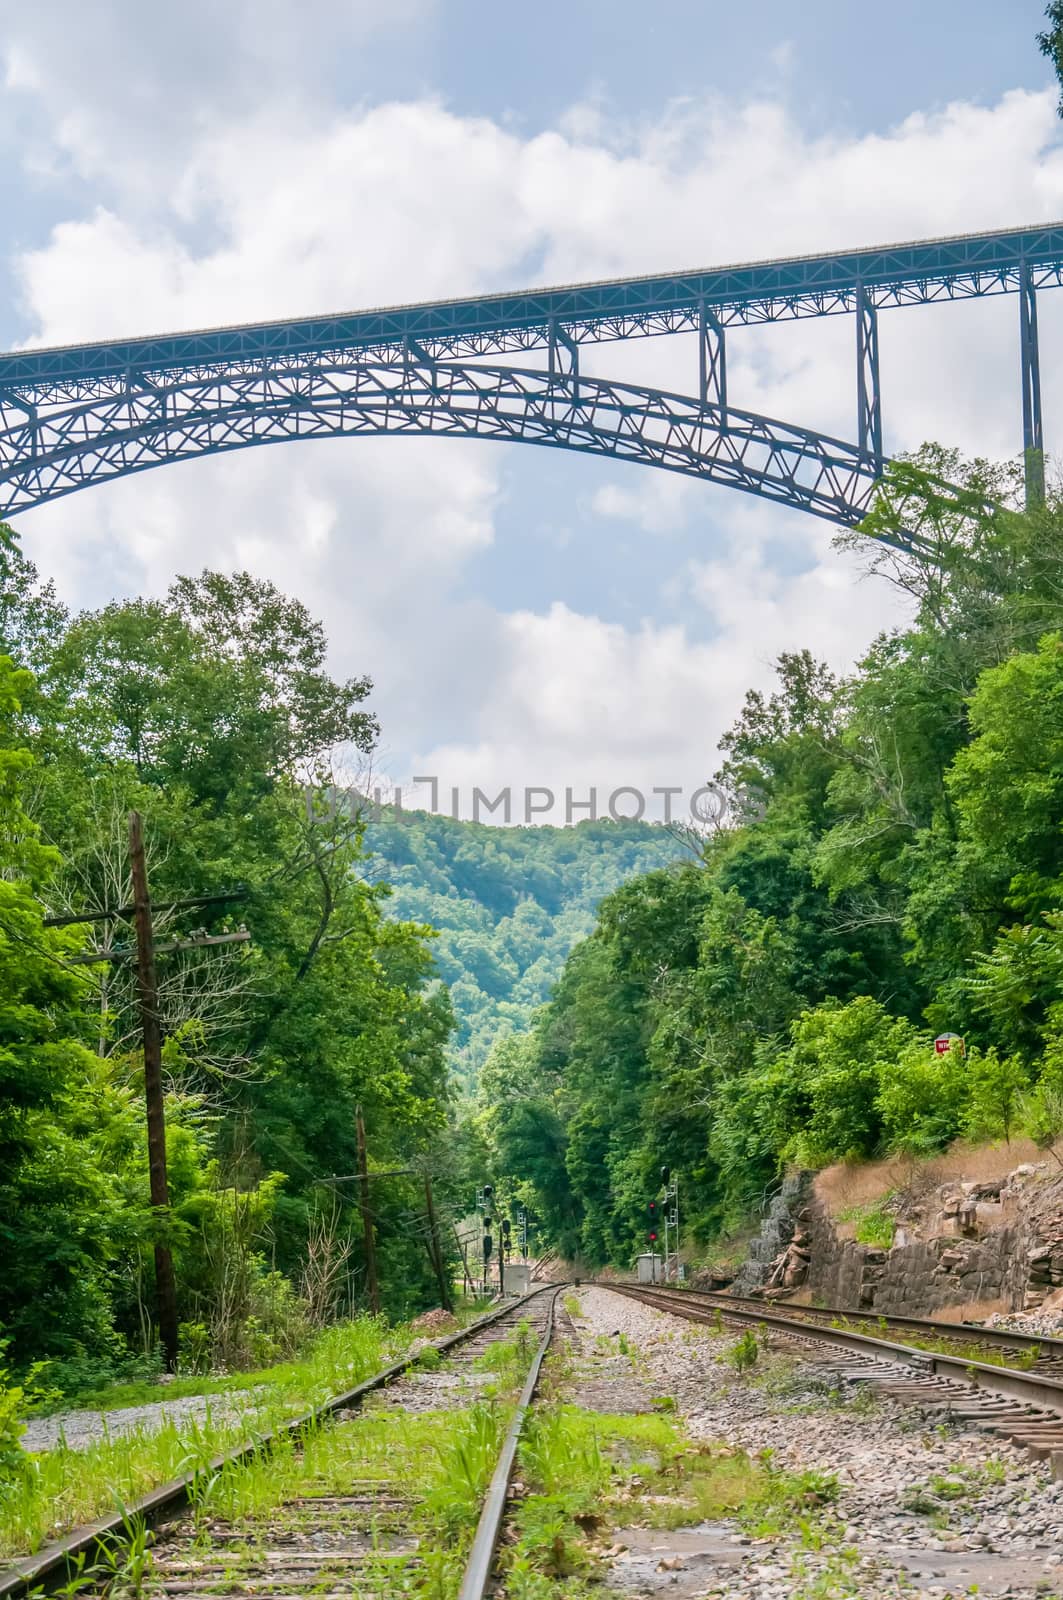 West Virginia's New River Gorge bridge carrying US 19  by digidreamgrafix